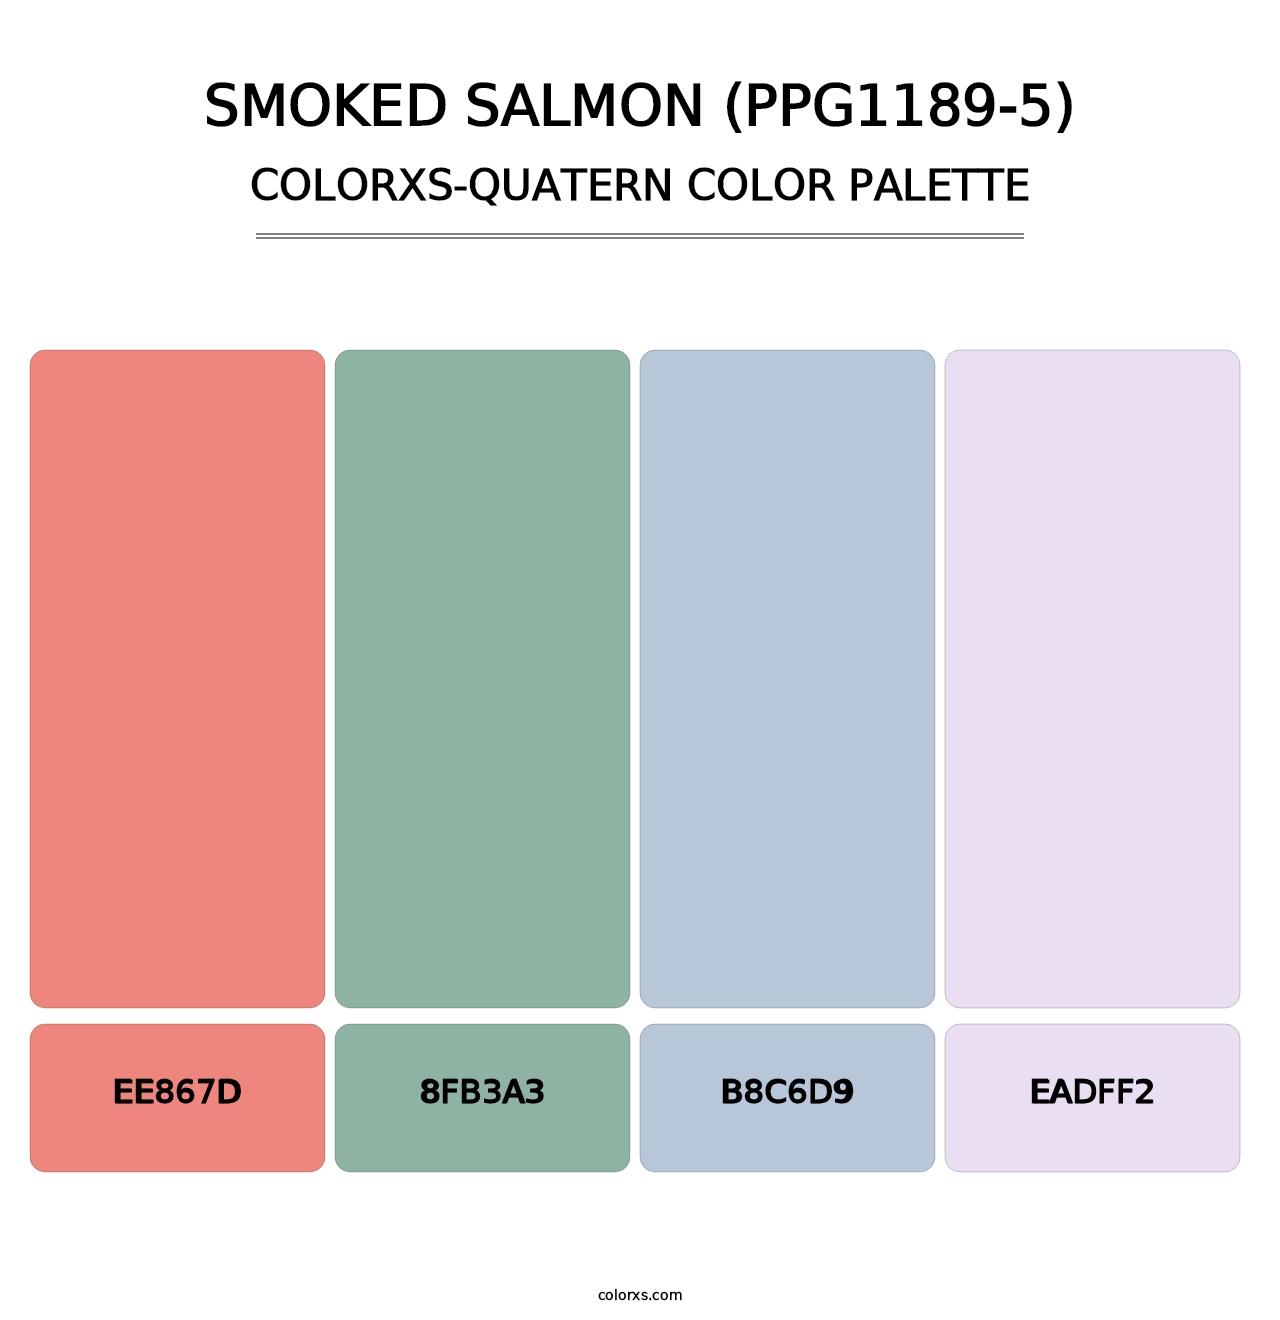 Smoked Salmon (PPG1189-5) - Colorxs Quatern Palette